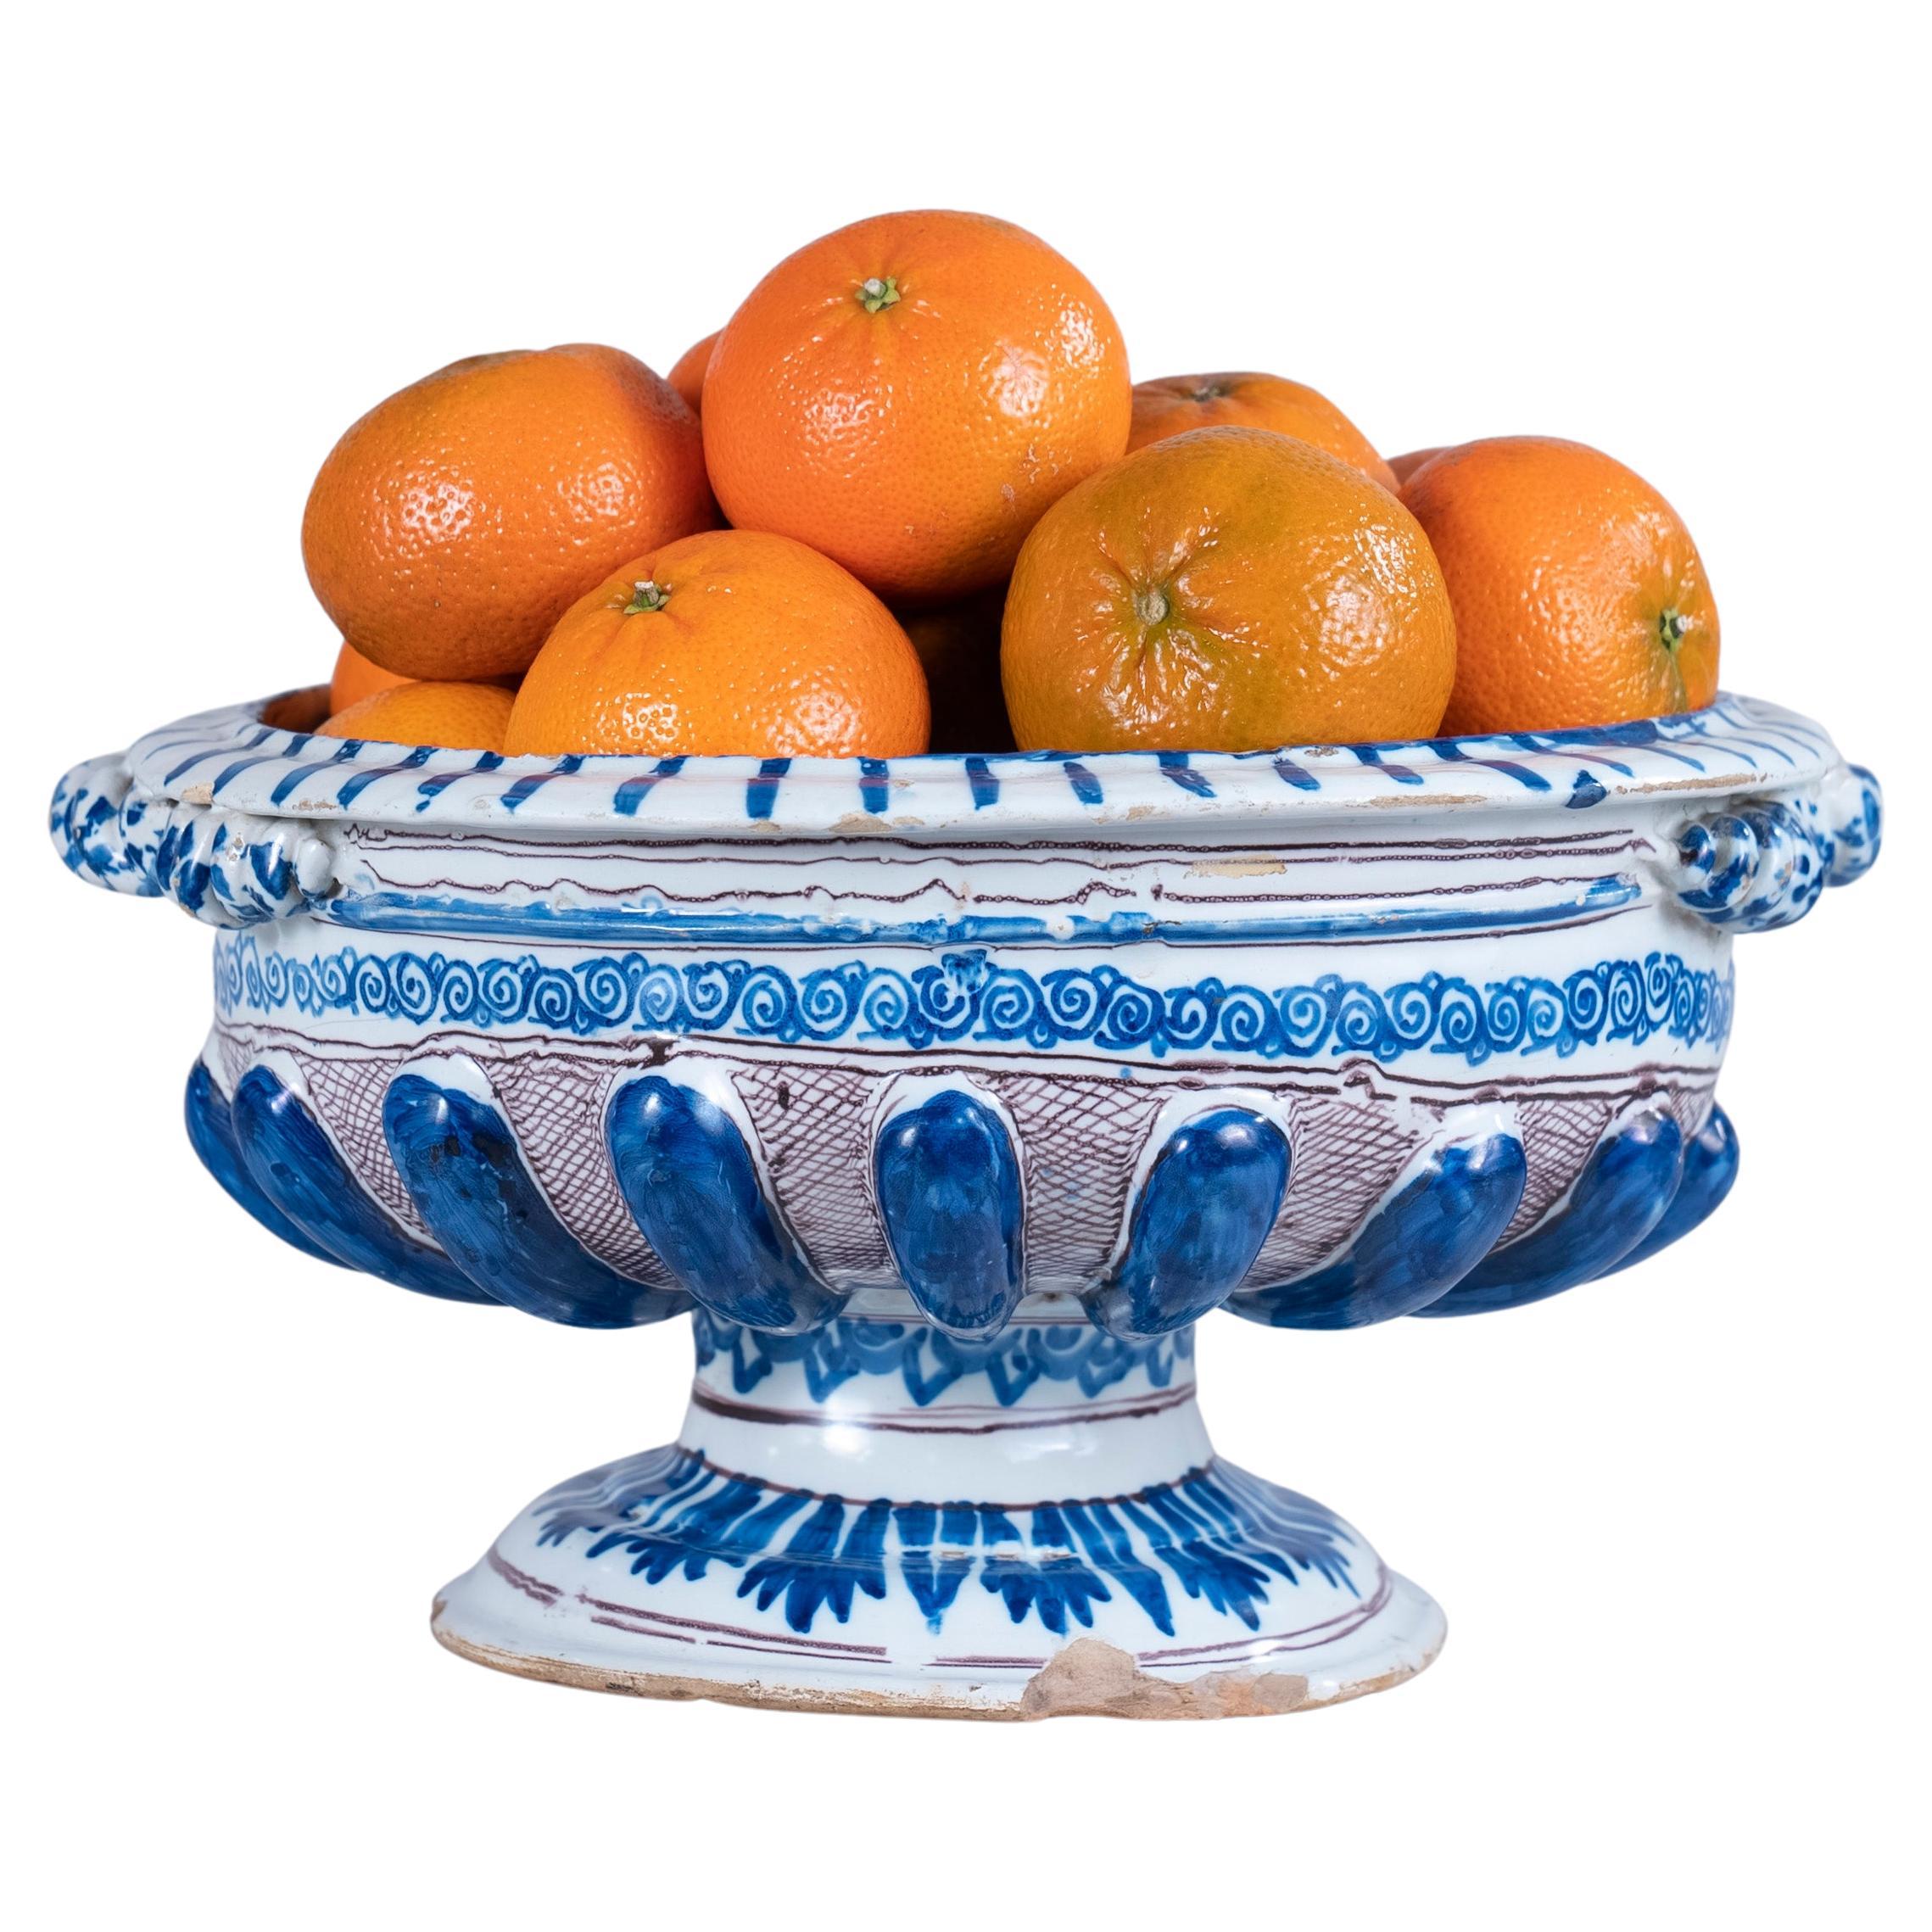 Rare, Bold Late 17th Century French Faience Bowl, Nevers, circa 1670